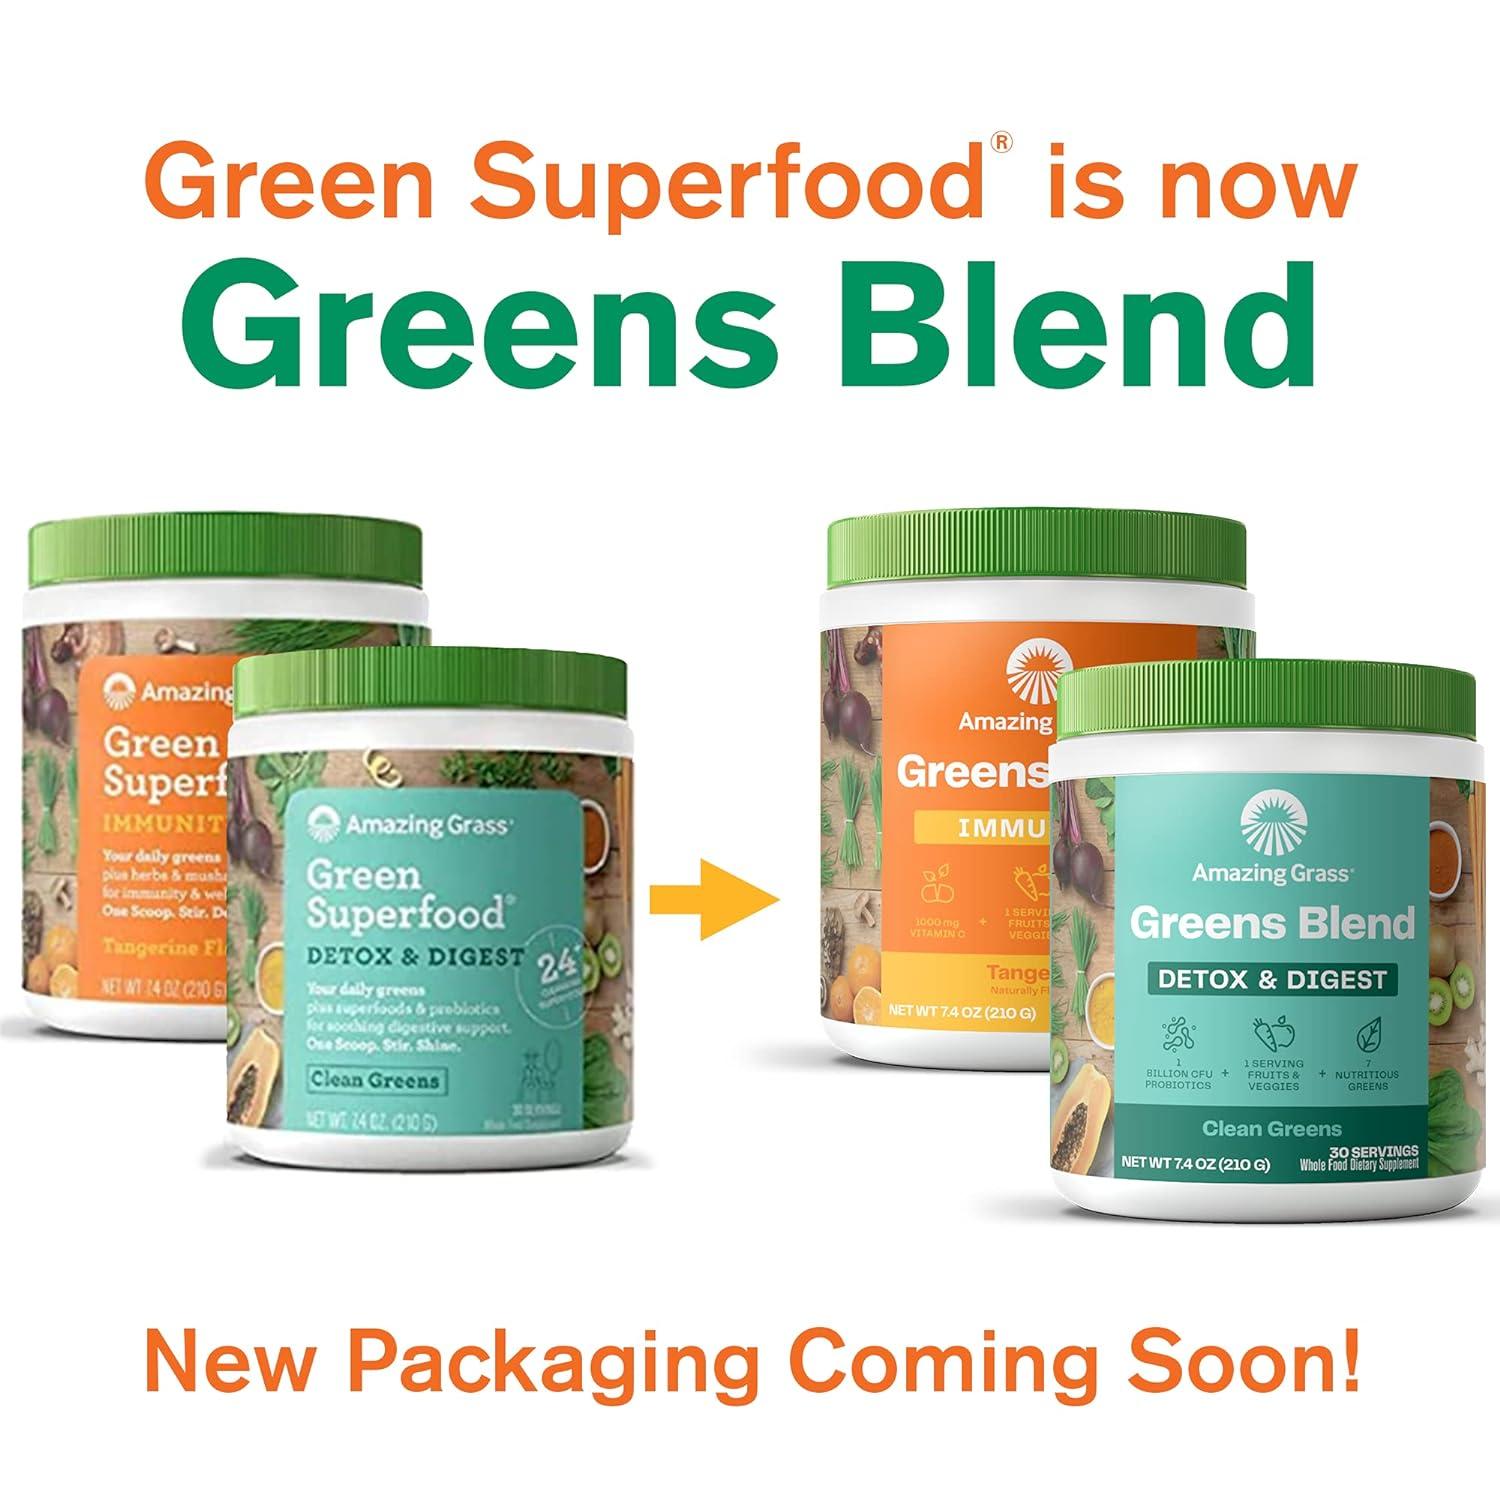 Amazing Grass Green Superfood Immunity: Super Greens Powder with Vitamin C  30 Servings & Green Superfood Detox & Digest: Cleanse with Super Greens  Powder Digestive Enzymes 30 Servings